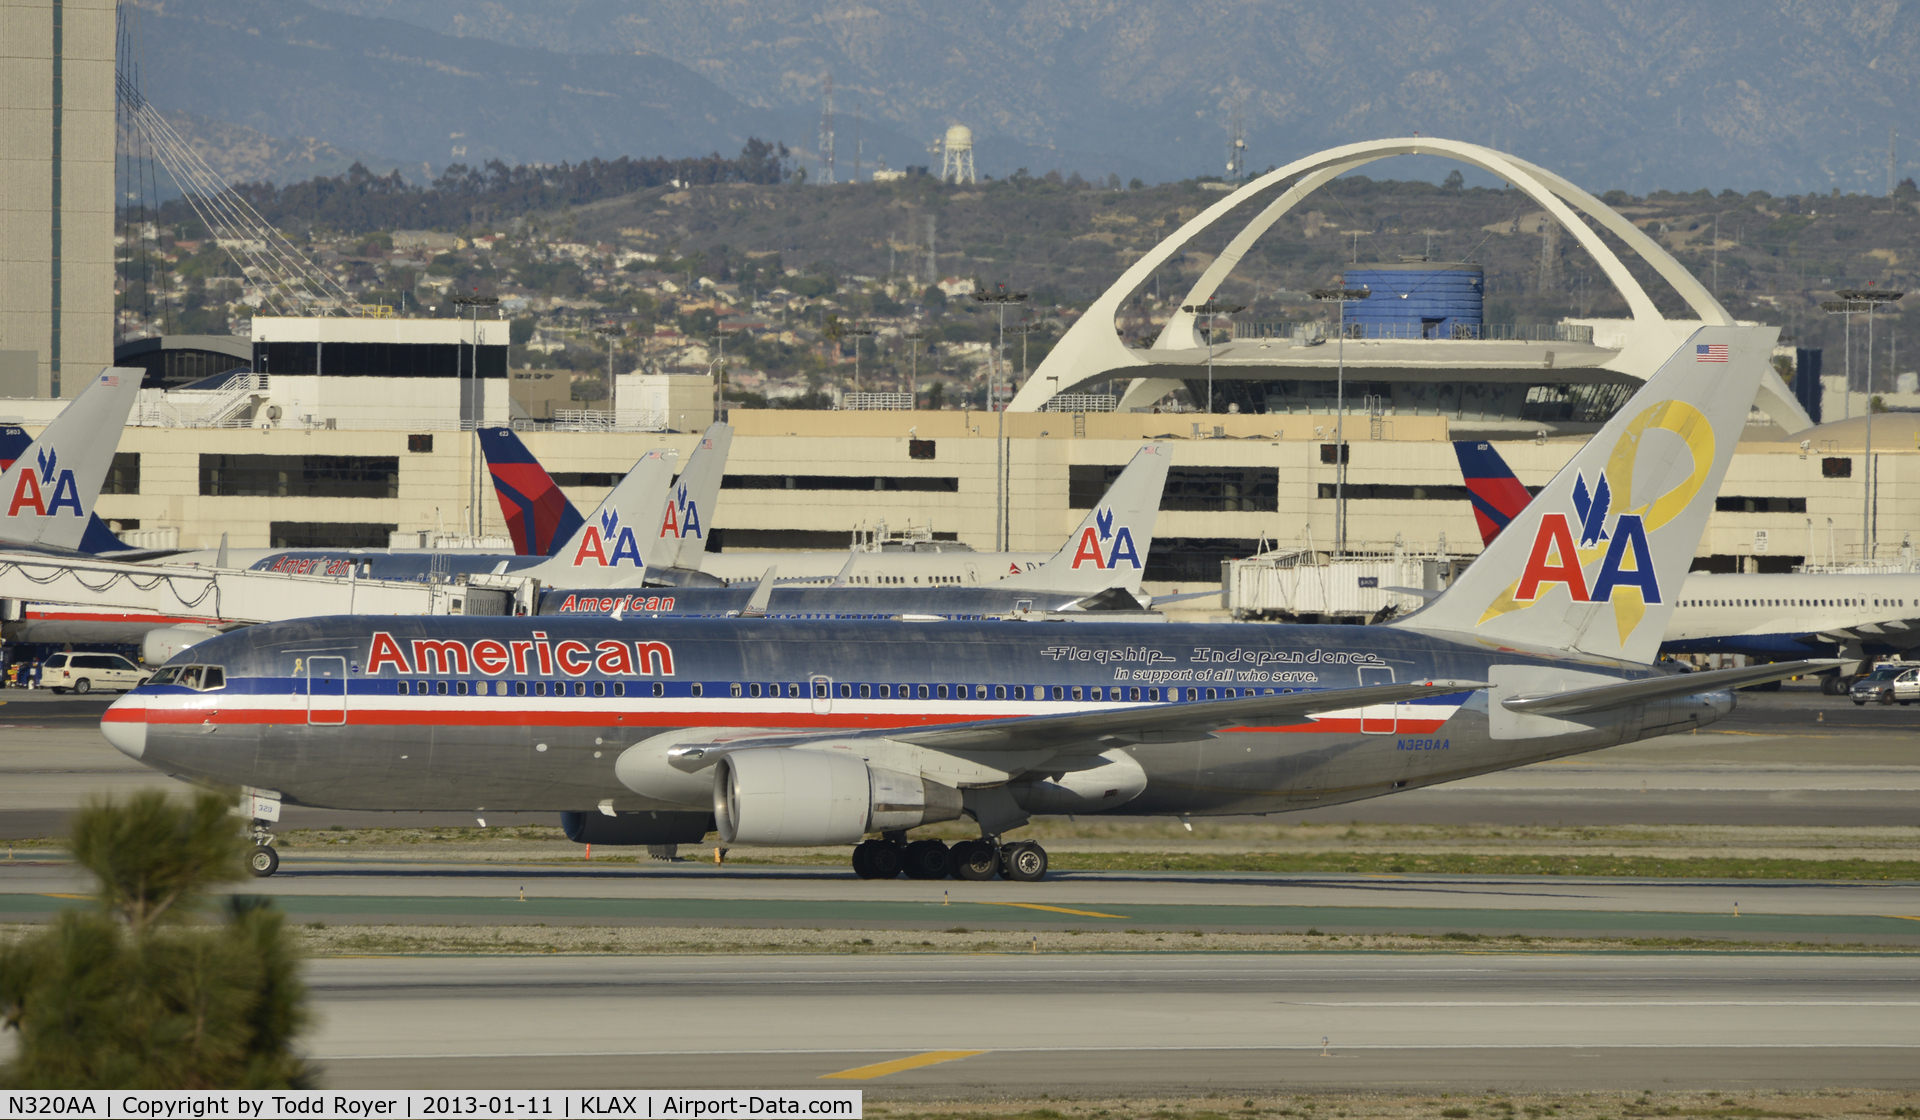 N320AA, 1985 Boeing 767-223 C/N 22321, Arrived at LAX on 25L